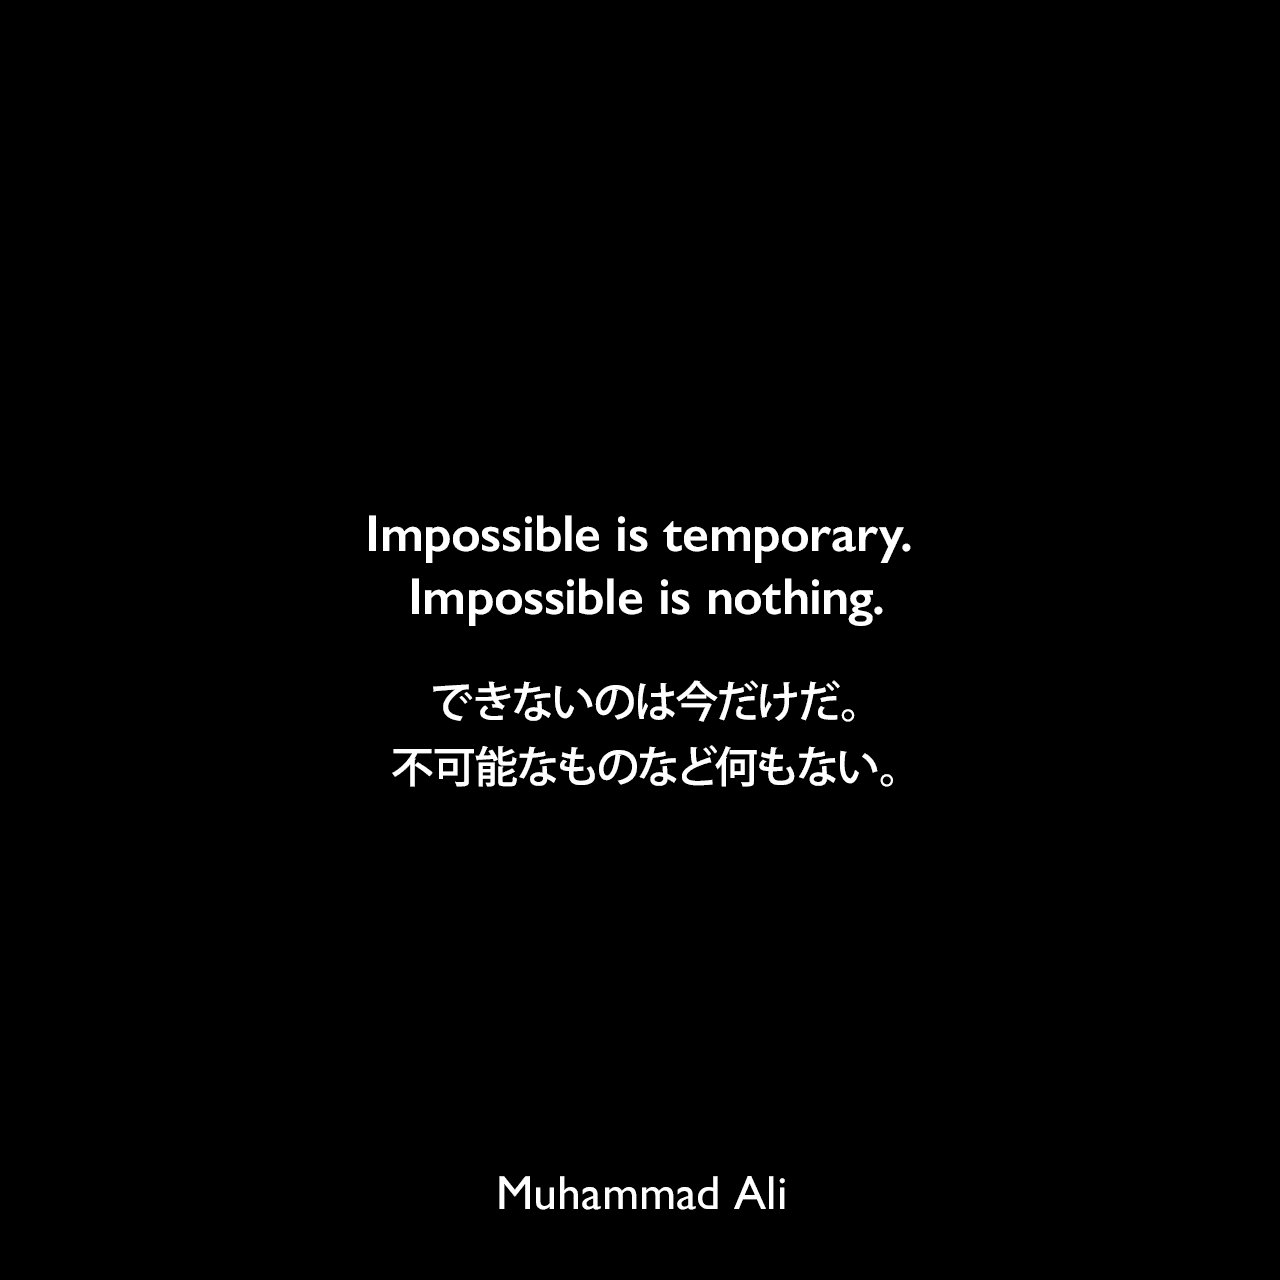 Impossible is temporary. Impossible is nothing.できないのは今だけだ。不可能なものなど何もない。